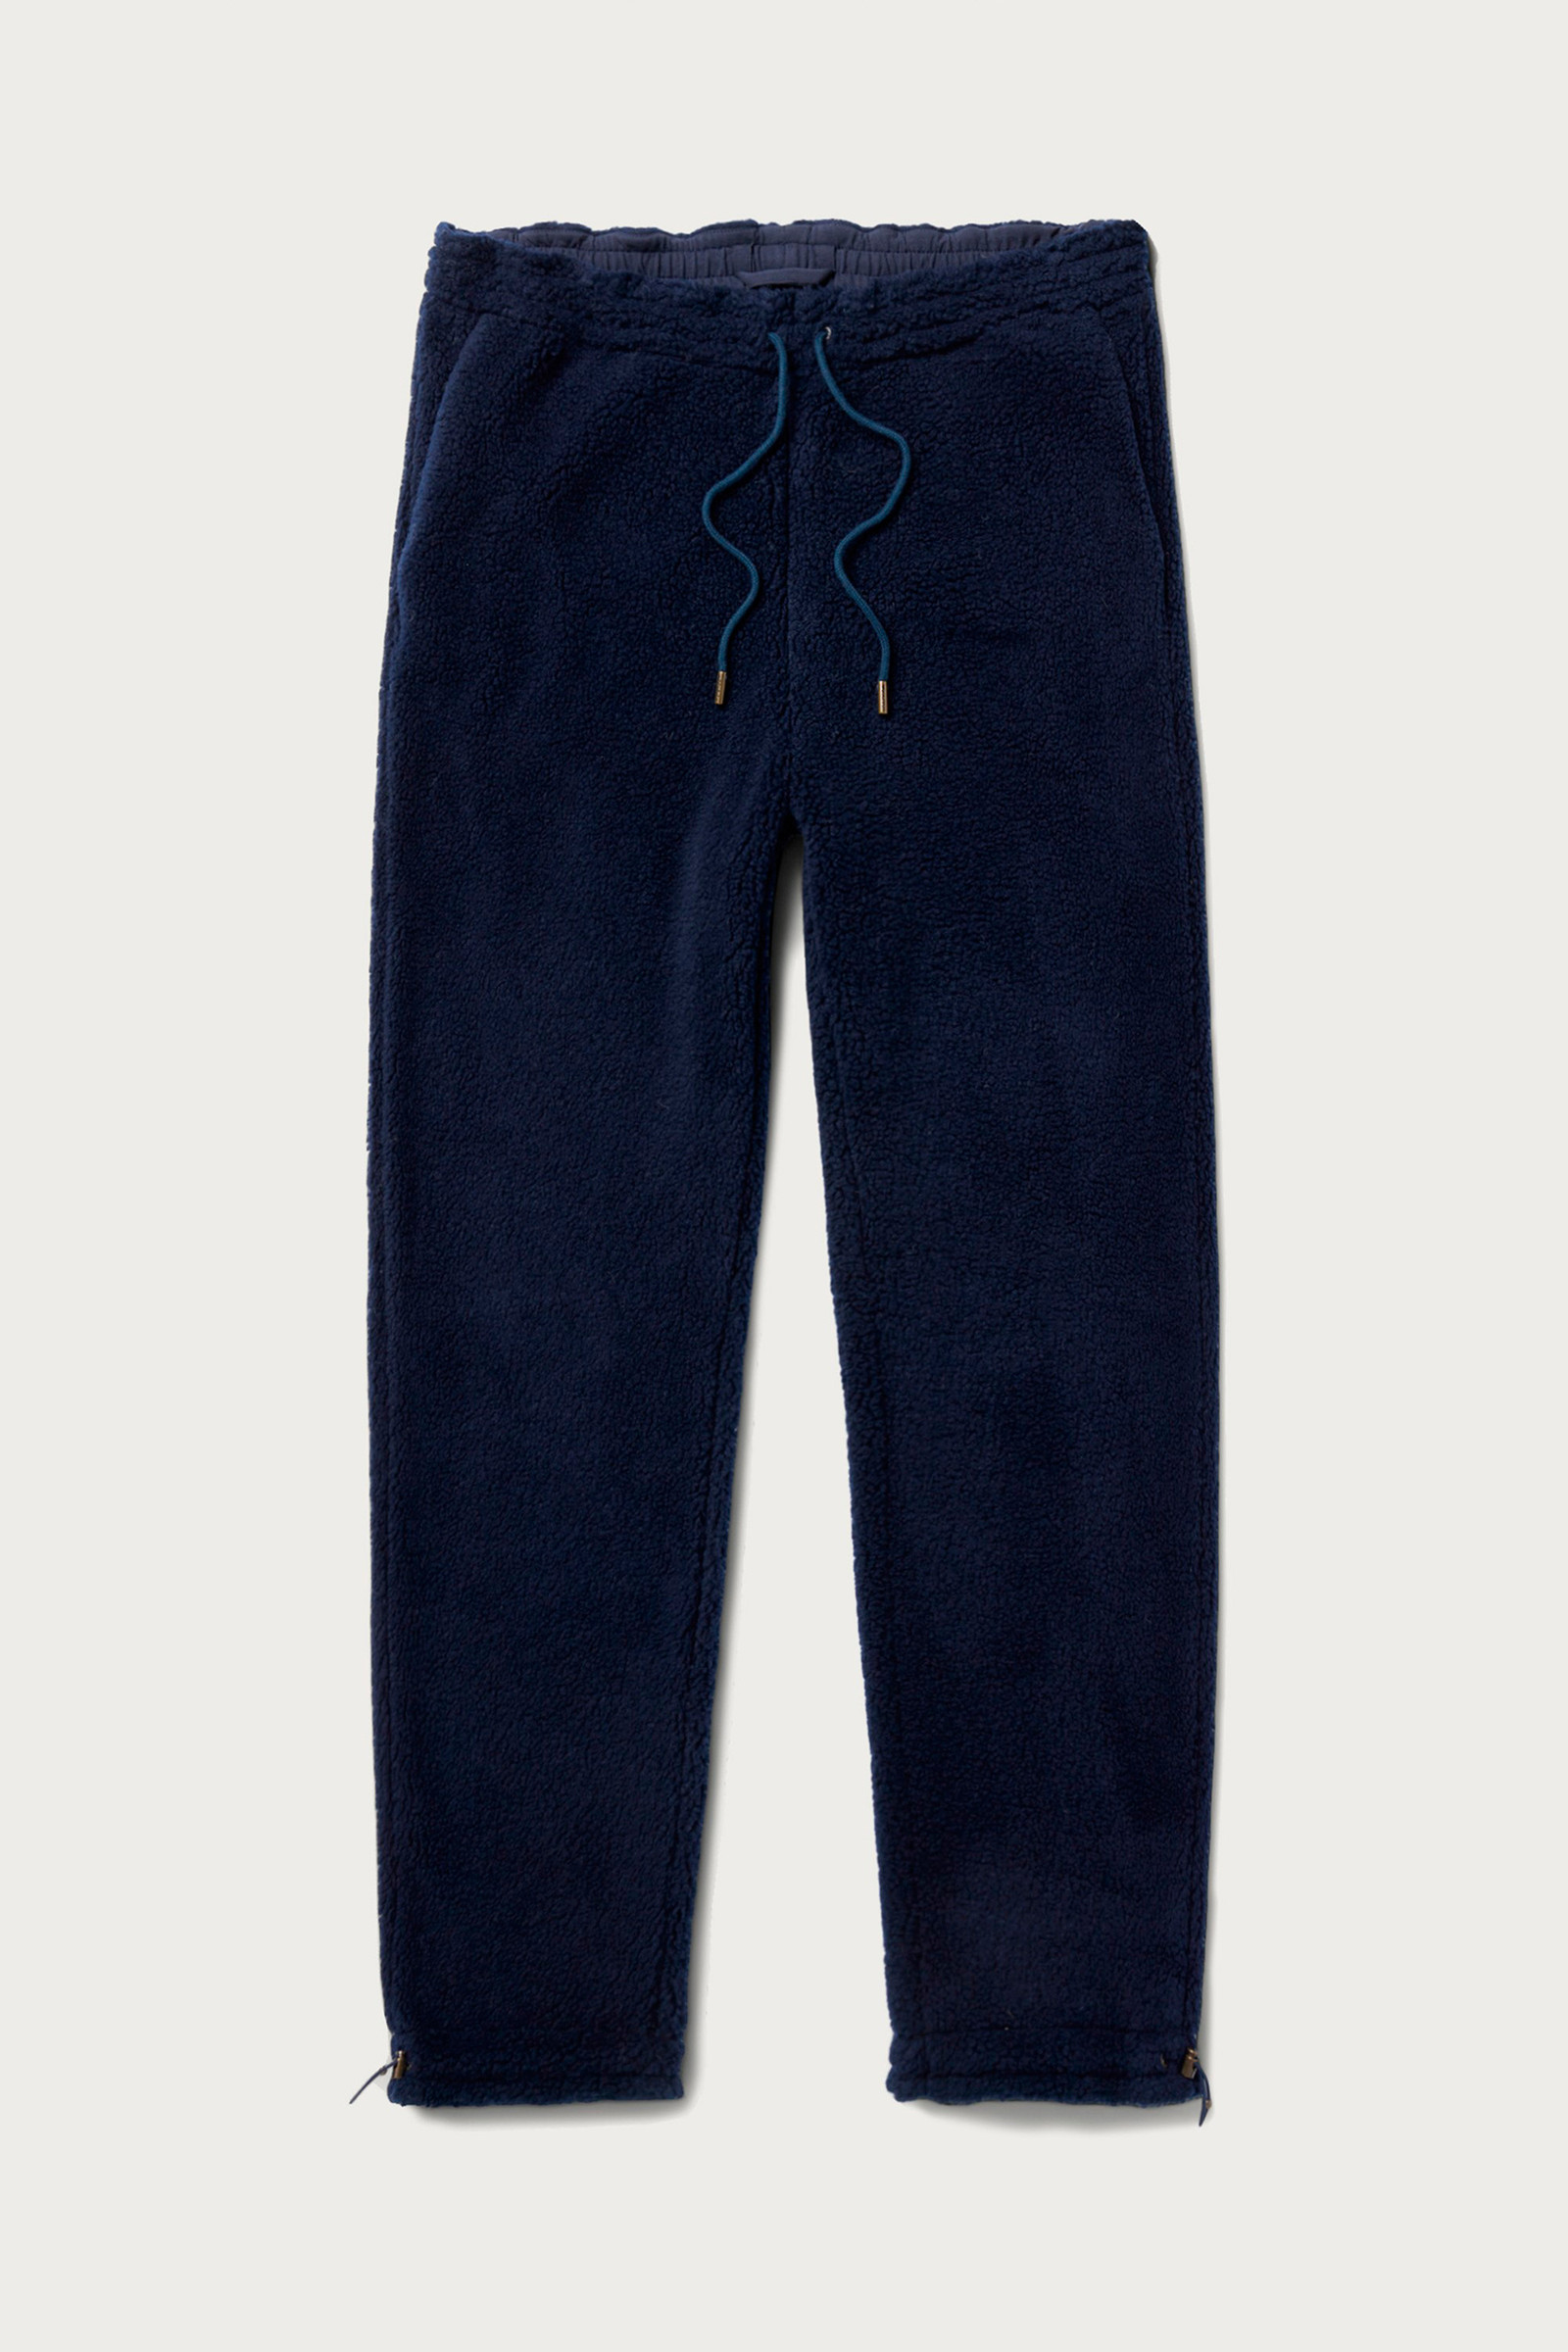 Men's Sherpa Sport Pants - One Of These Days / Woolrich Blue | Woolrich USA